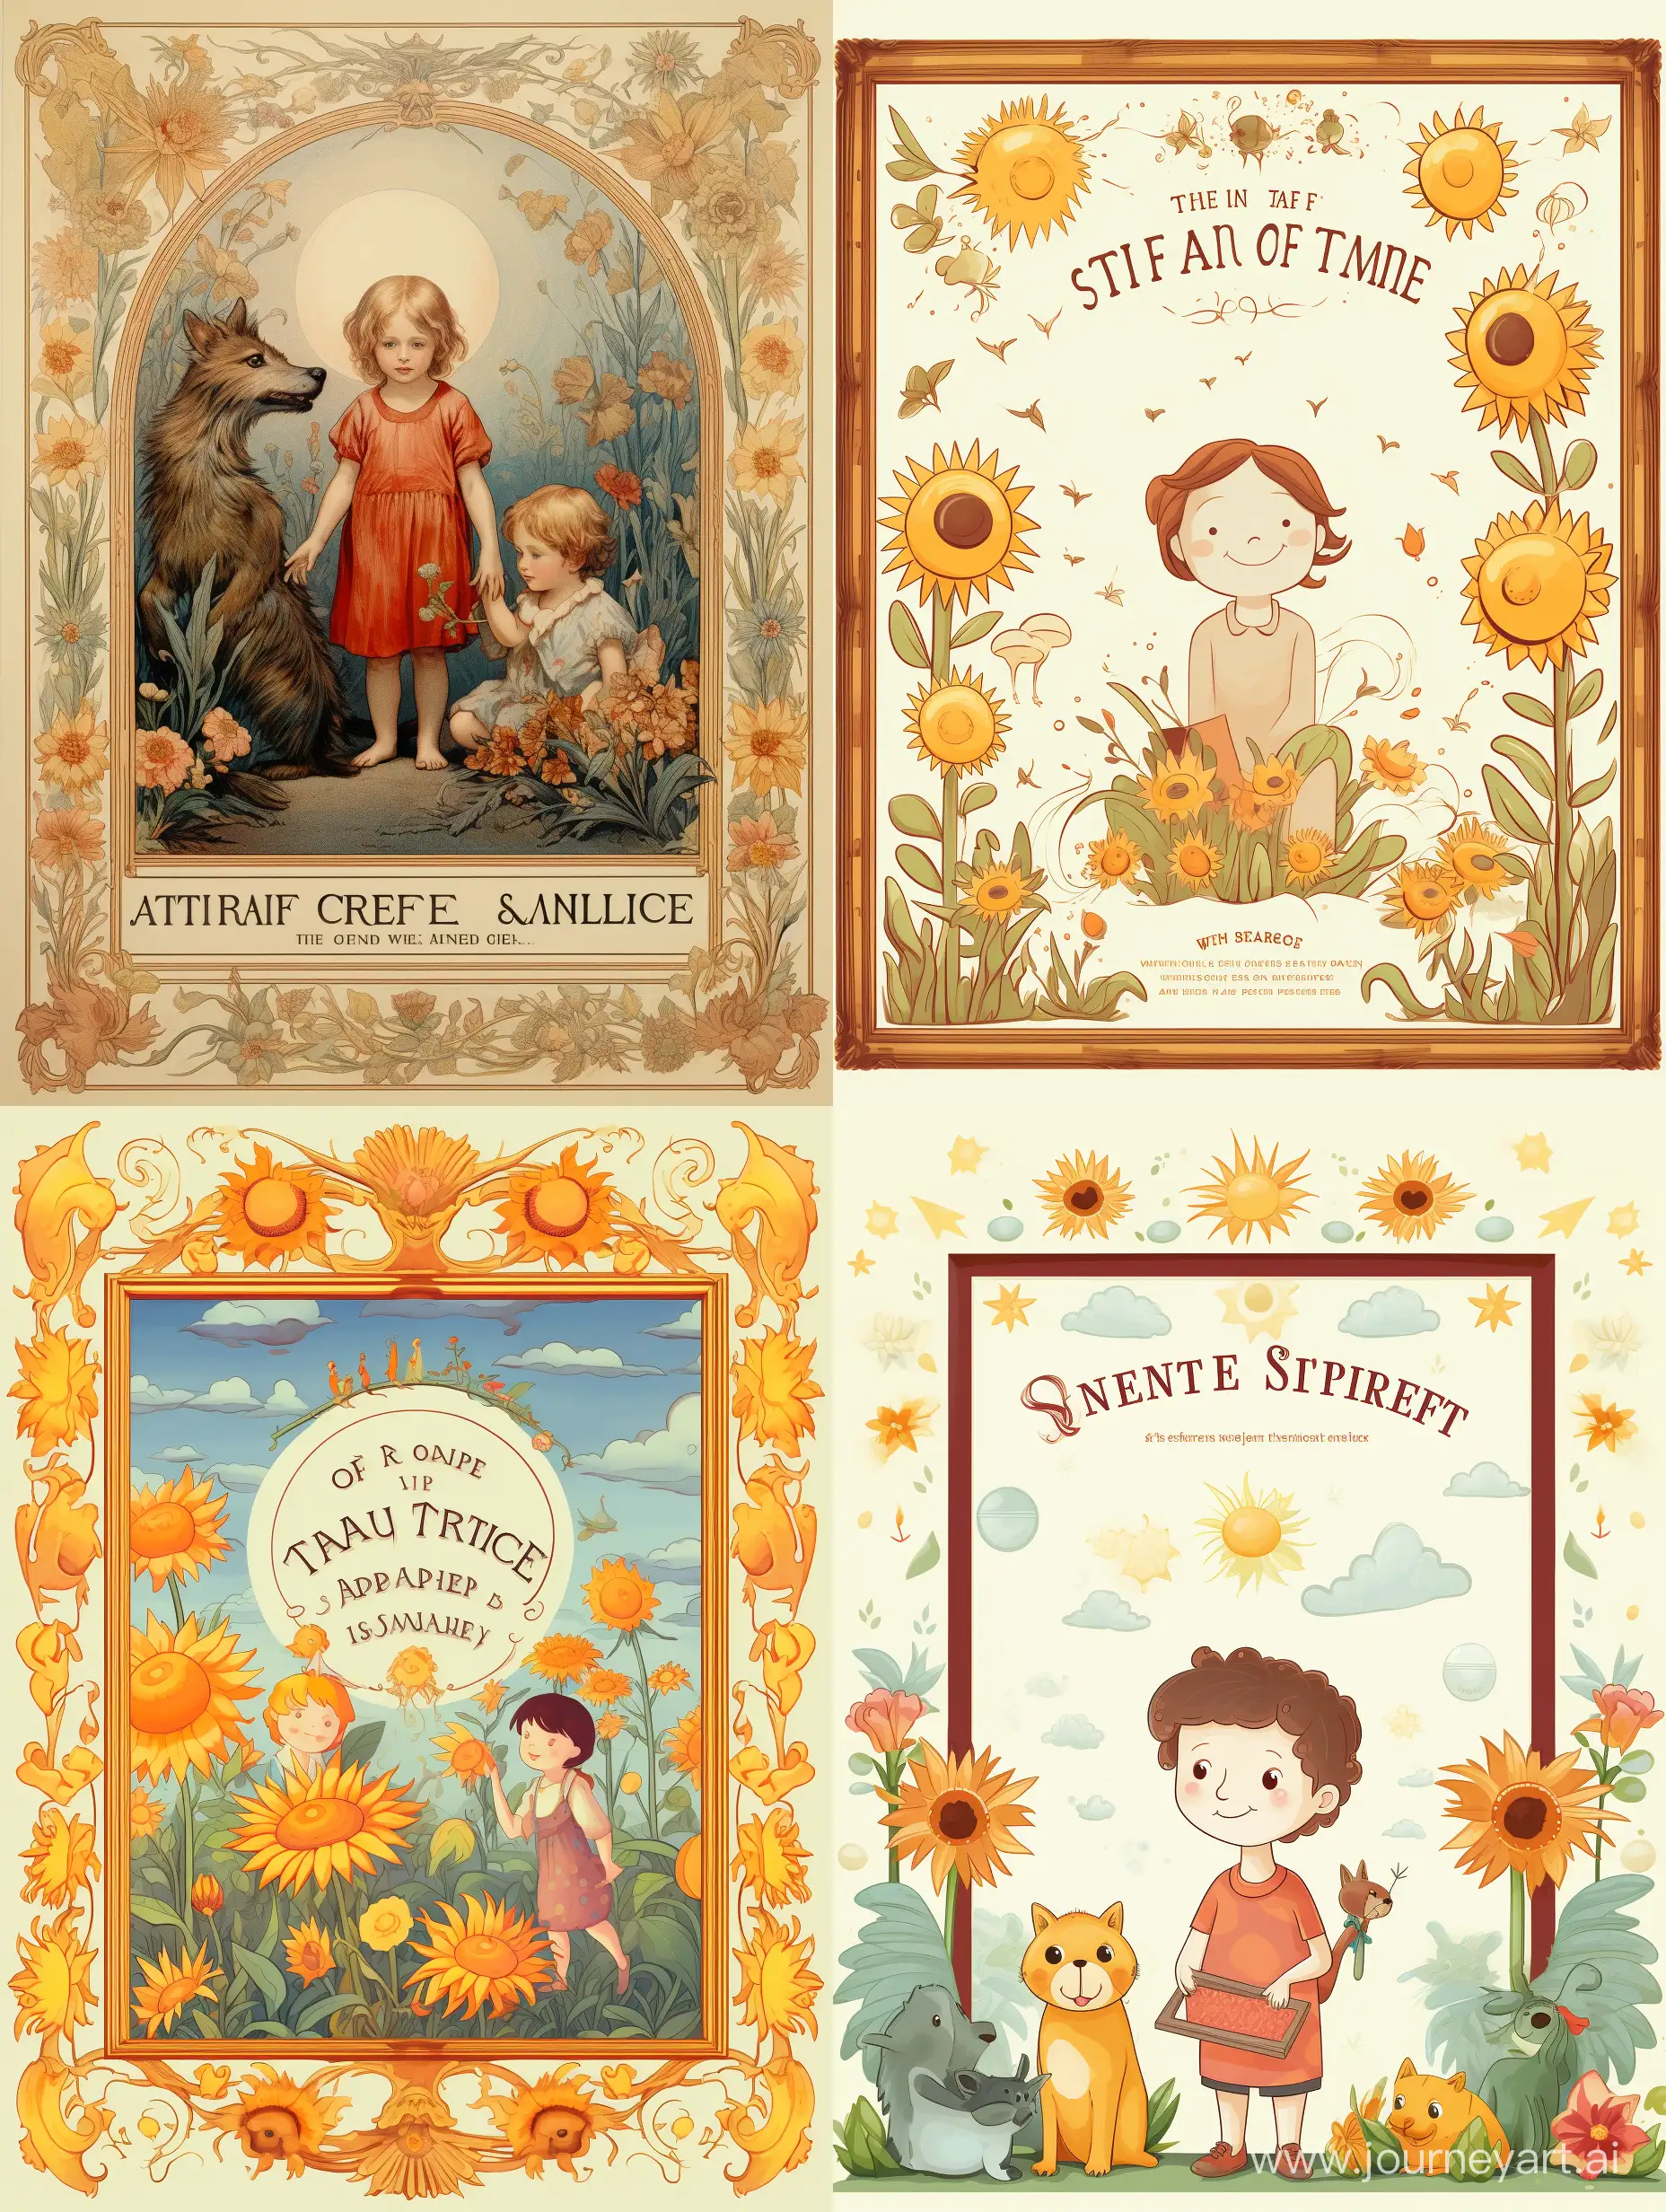 Charming-Certificate-of-Appreciation-with-Children-Sun-Animals-and-Flowers